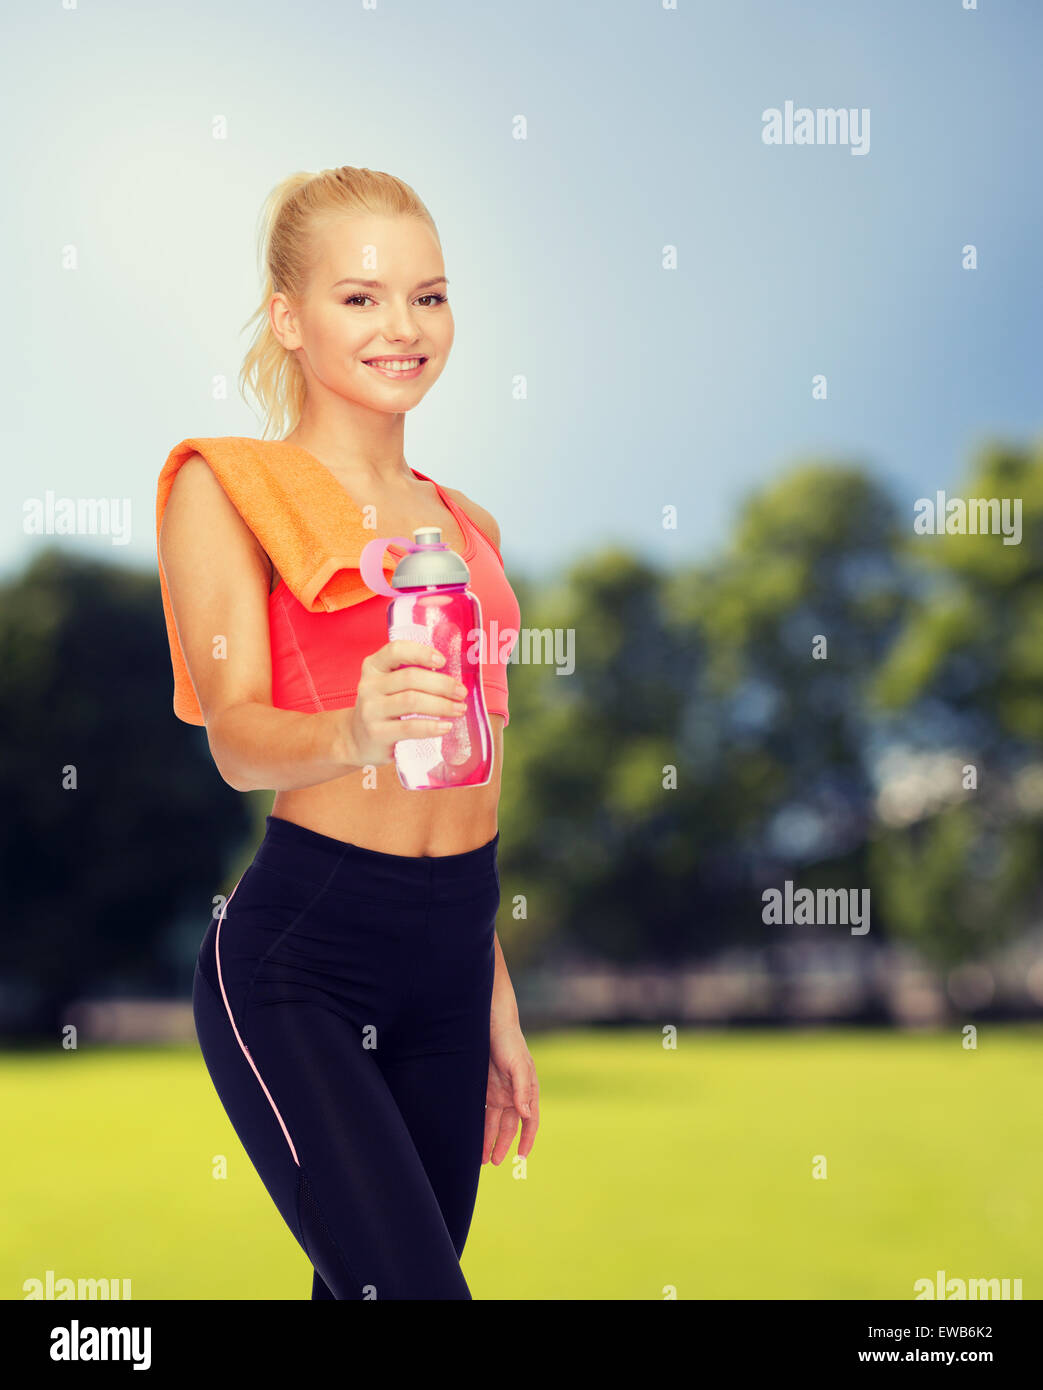 smiling sporty woman with water bottle and towel Stock Photo